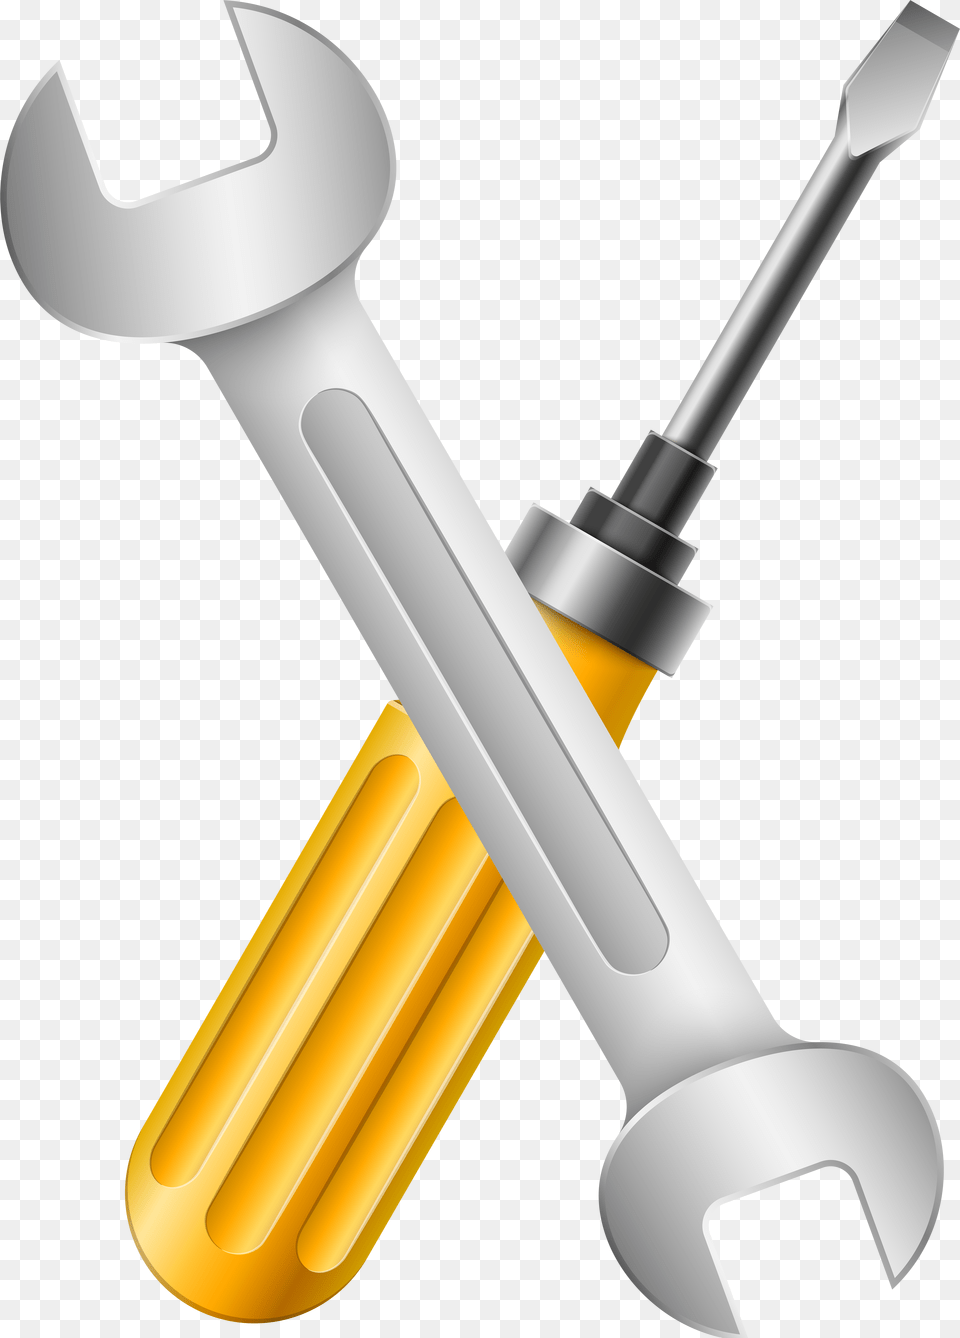 Wrench And Screwdriver Clip Art Screwdriver Free Transparent Png